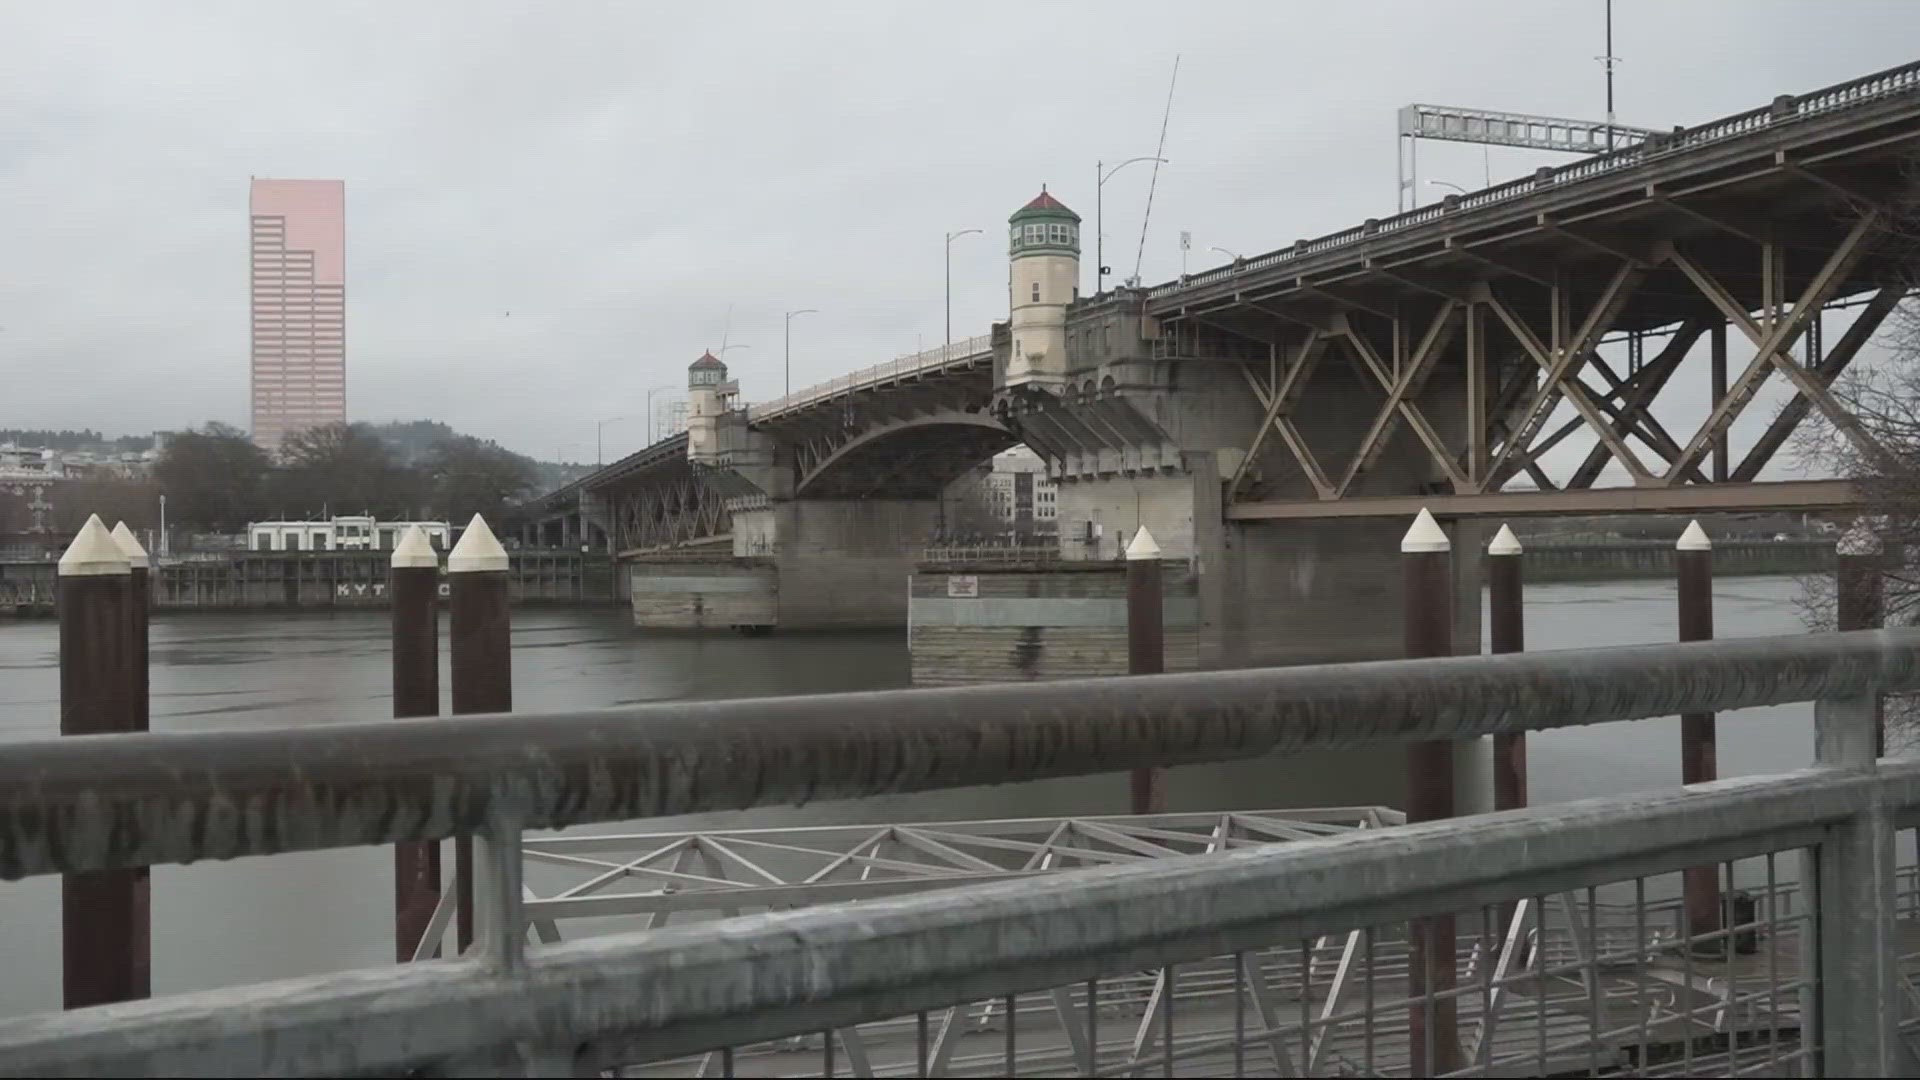 Multnomah County announced the contractors that will finish the work that begun in 2016 after the county found no downtown bridges would survive a major earthquake.